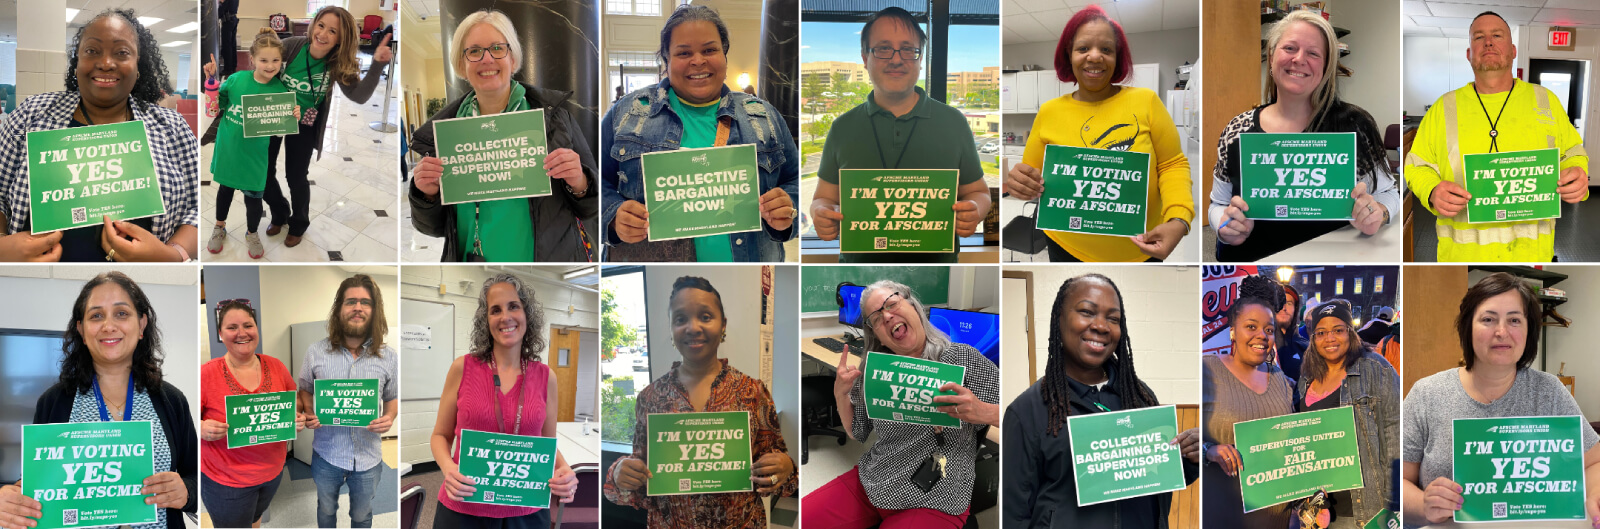 We're voting YES for AFSCME Supervisors Union